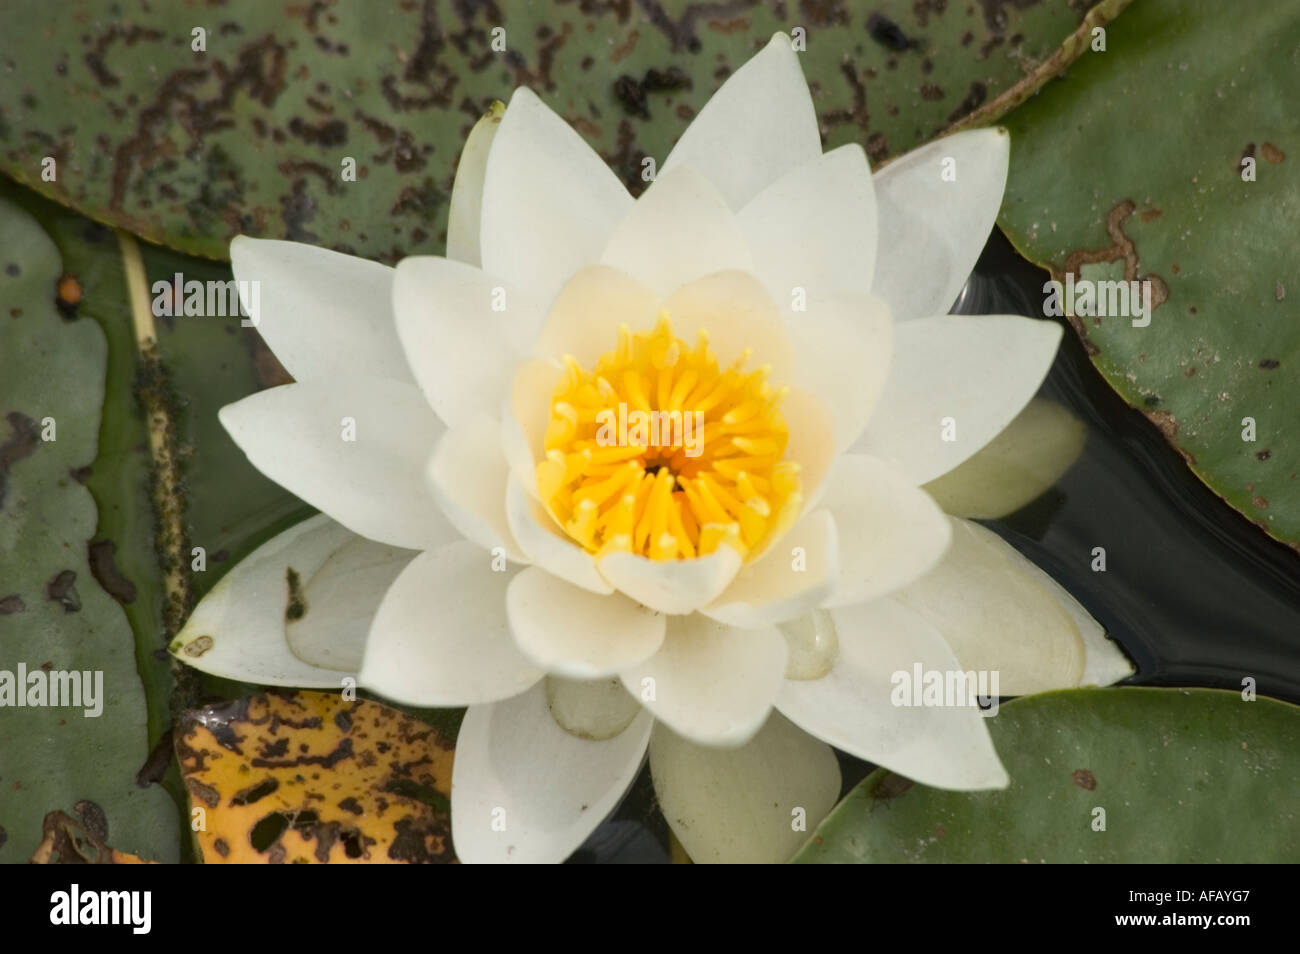 White yellow Water Lily closeup growing in pond LATIN NAME Nymphaea Stock Photo